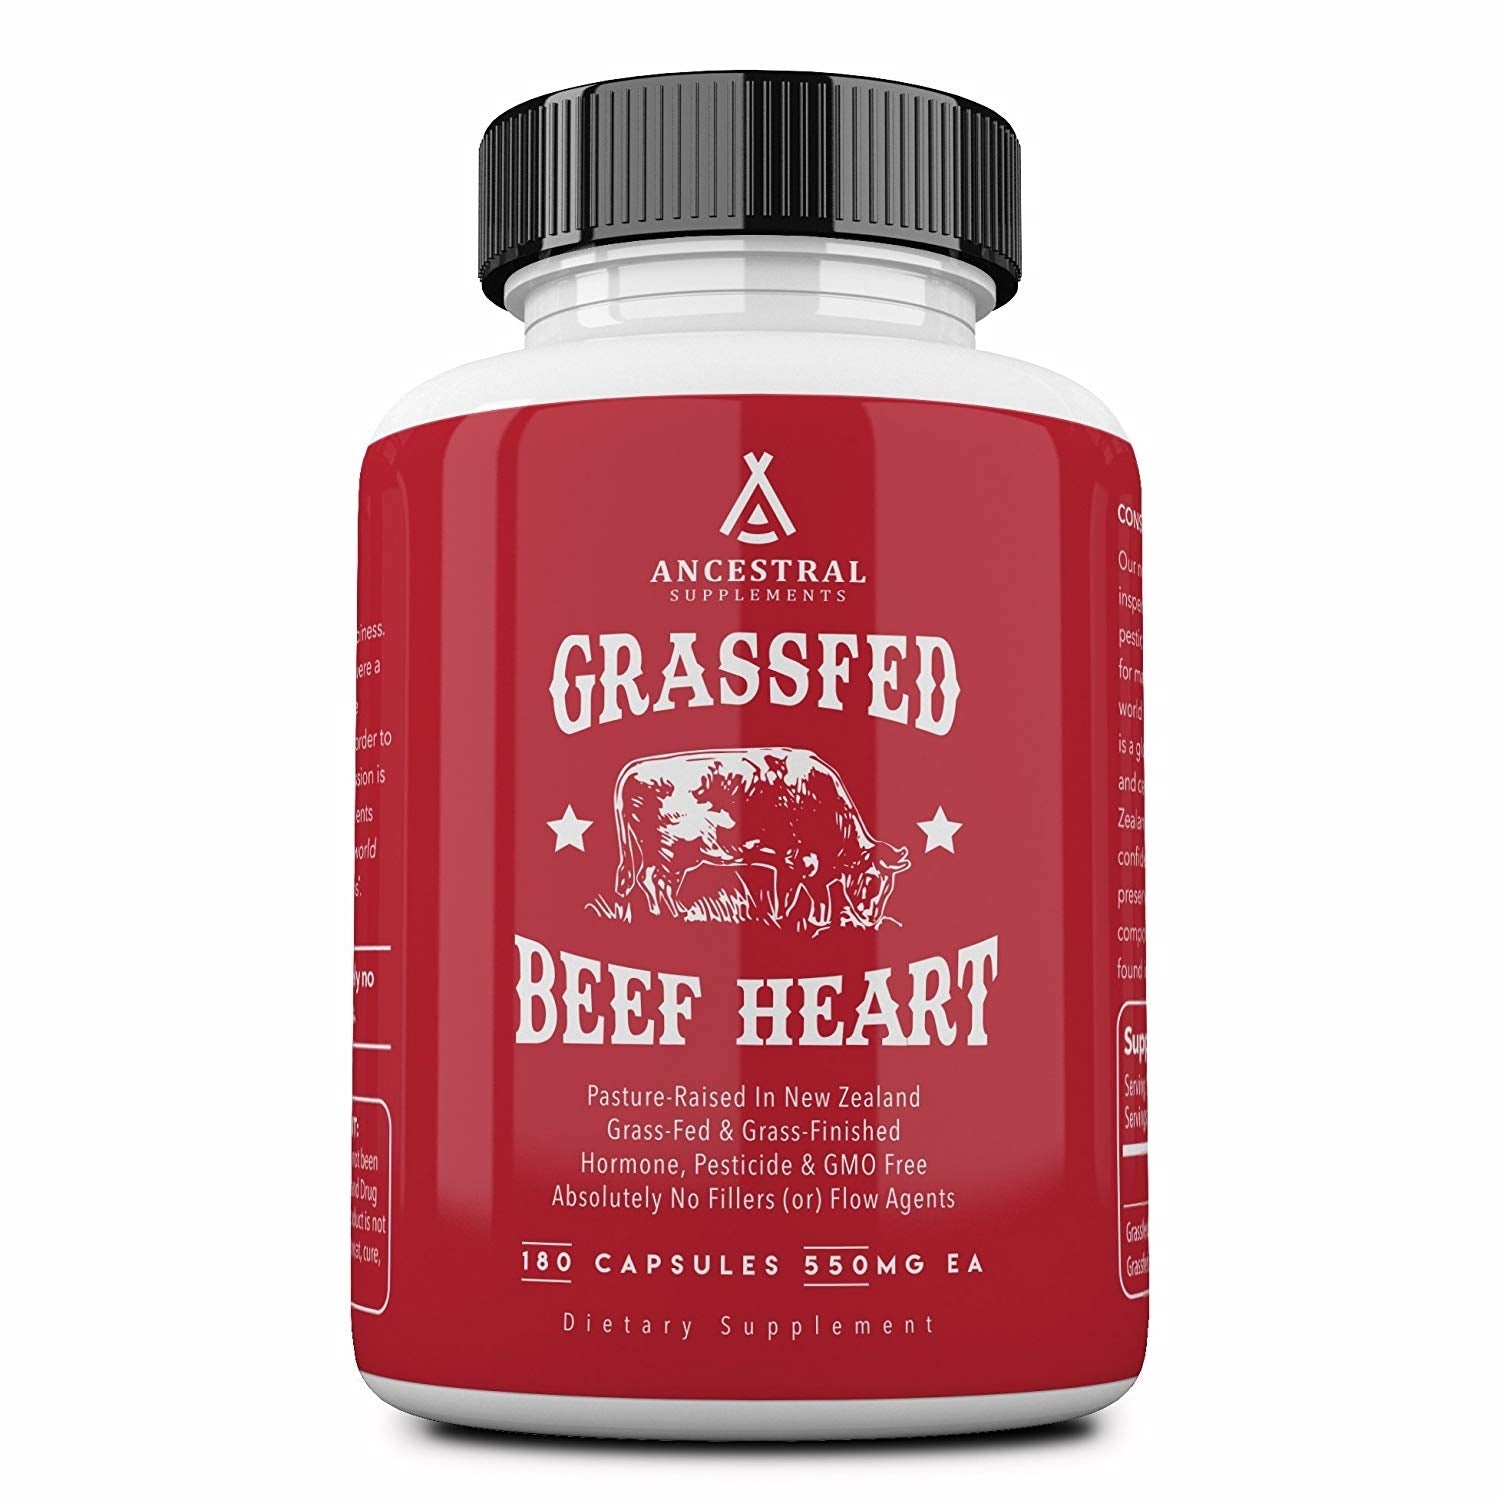 Grassfed Beef Heart - 180 capsules